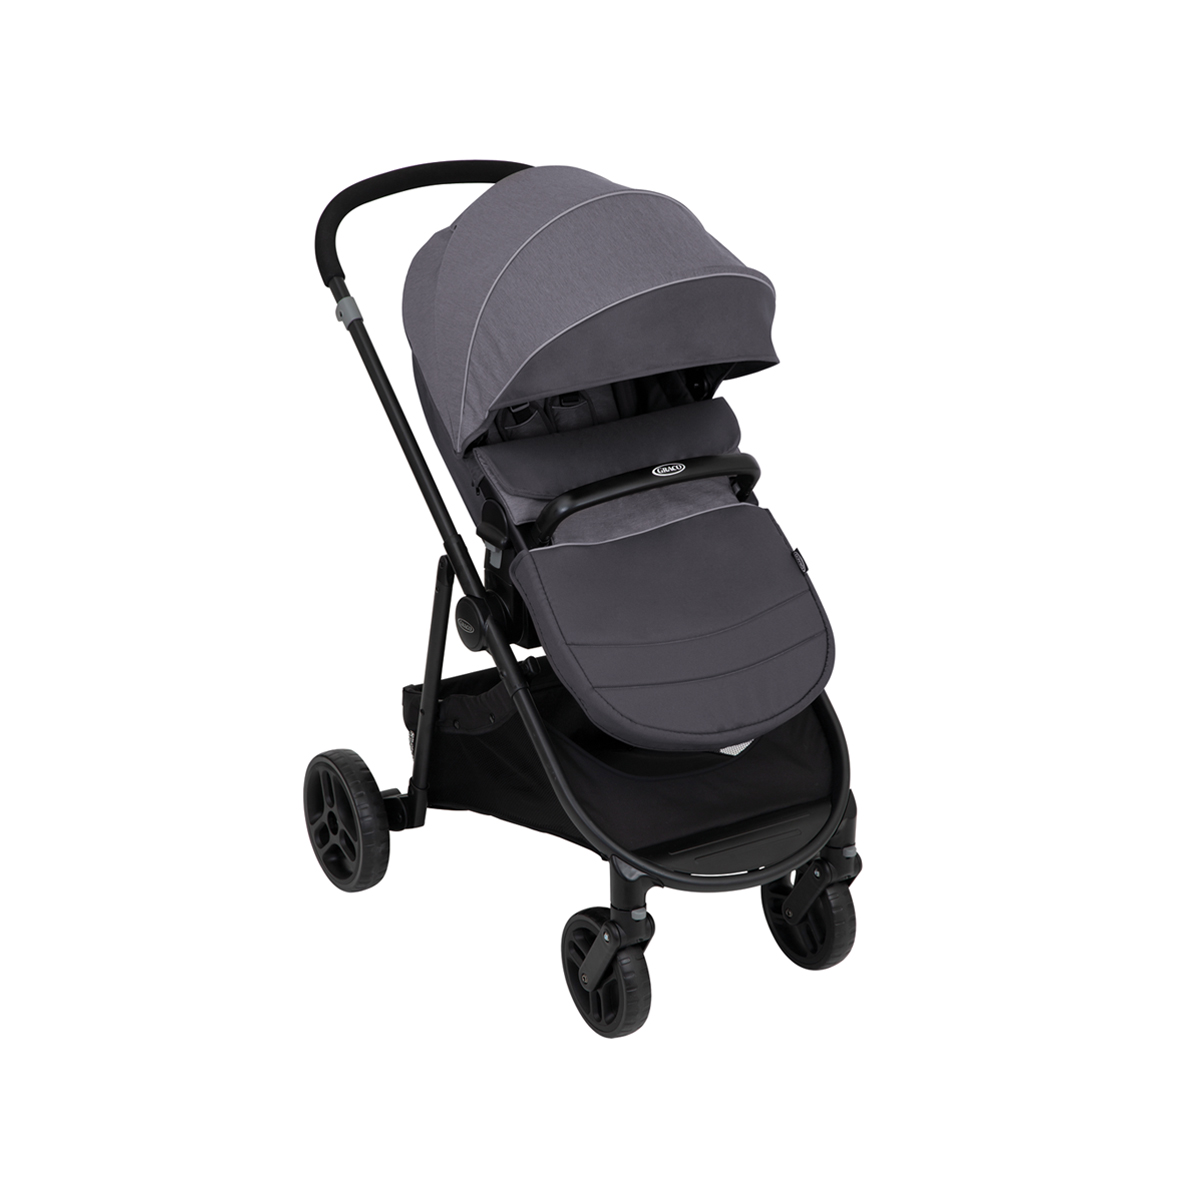 Graco Transform in pushchair mode with apron three quarter angle